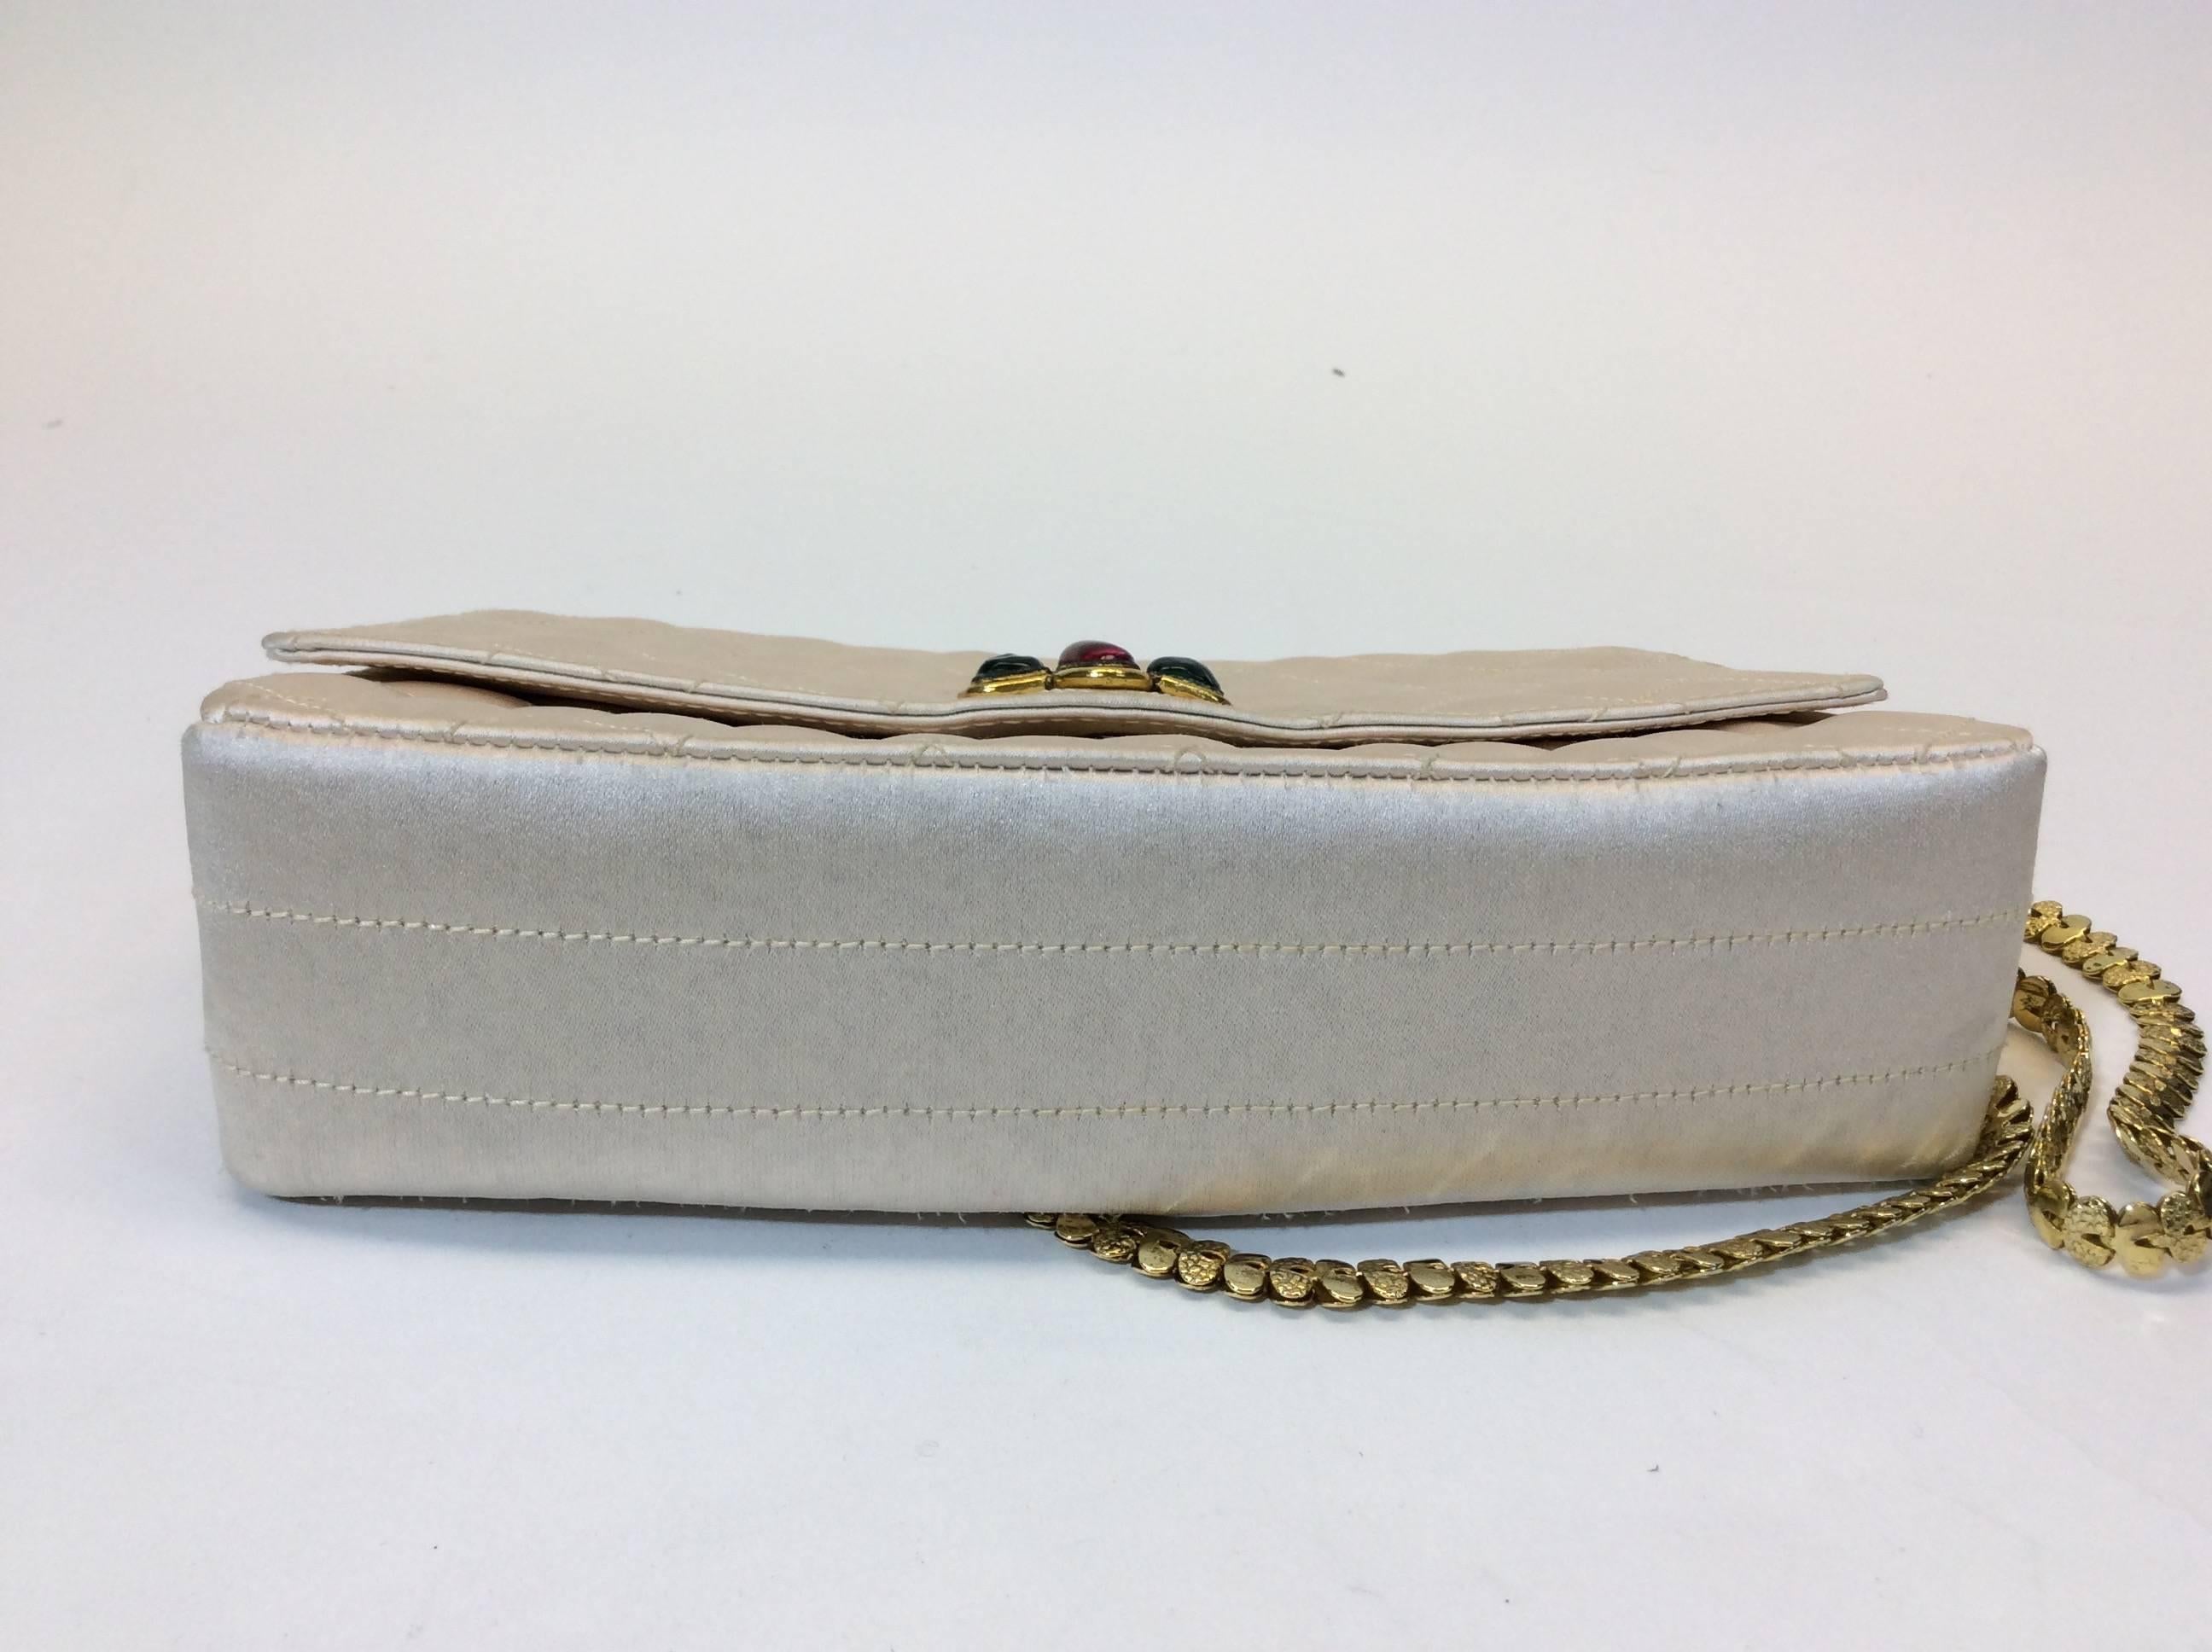 Chanel Vintage Pleated White Purse with Gripoix Detail In Excellent Condition For Sale In Narberth, PA